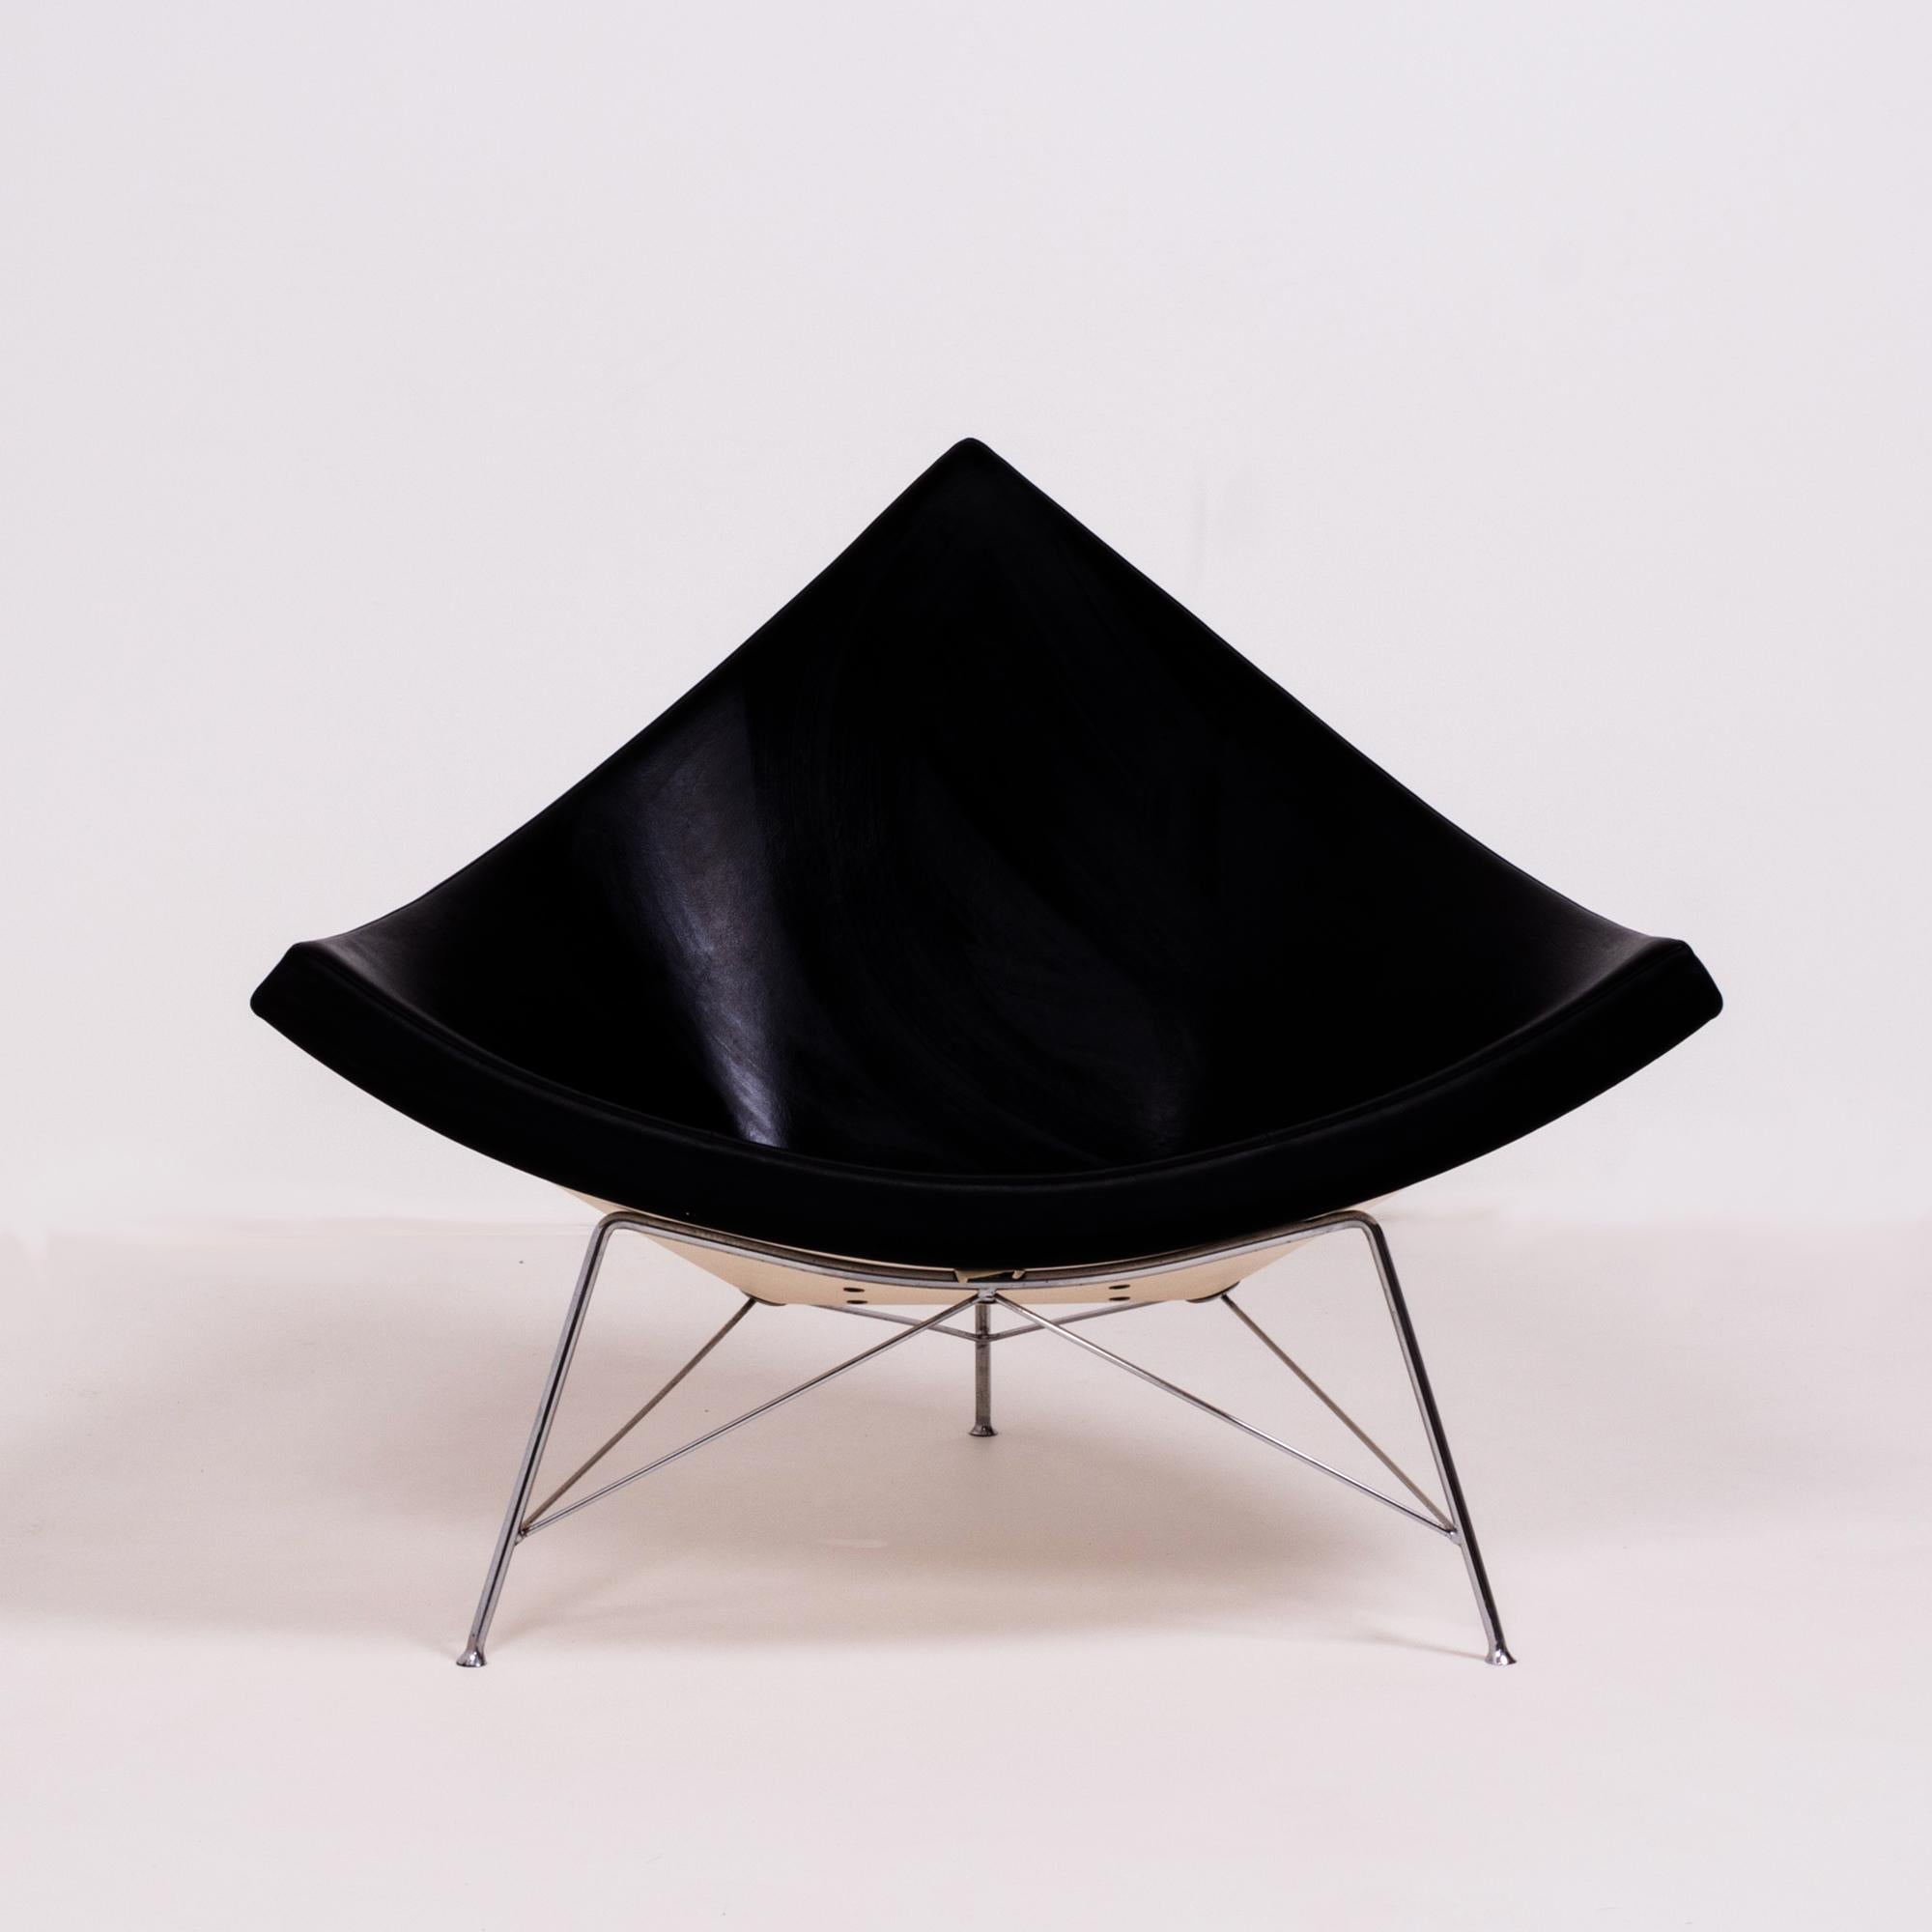 Originally designed by George Nelson in 1955, the Coconut chair has become a design Classic.

Constructed with a white glass fibre reinforced plastic shell, the chair is upholstered in black leather with a tubular steel base in a polished chrome